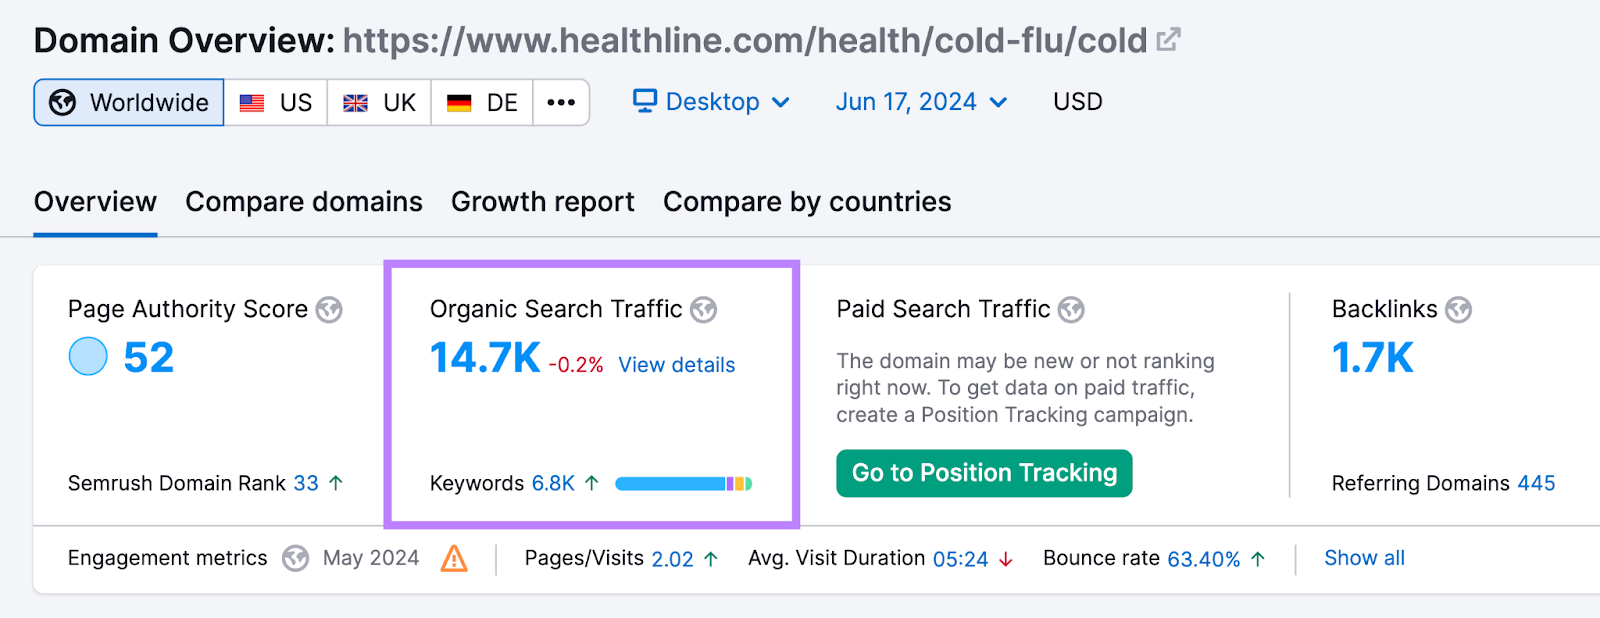 organic search traffic highlighted for the healthline article url